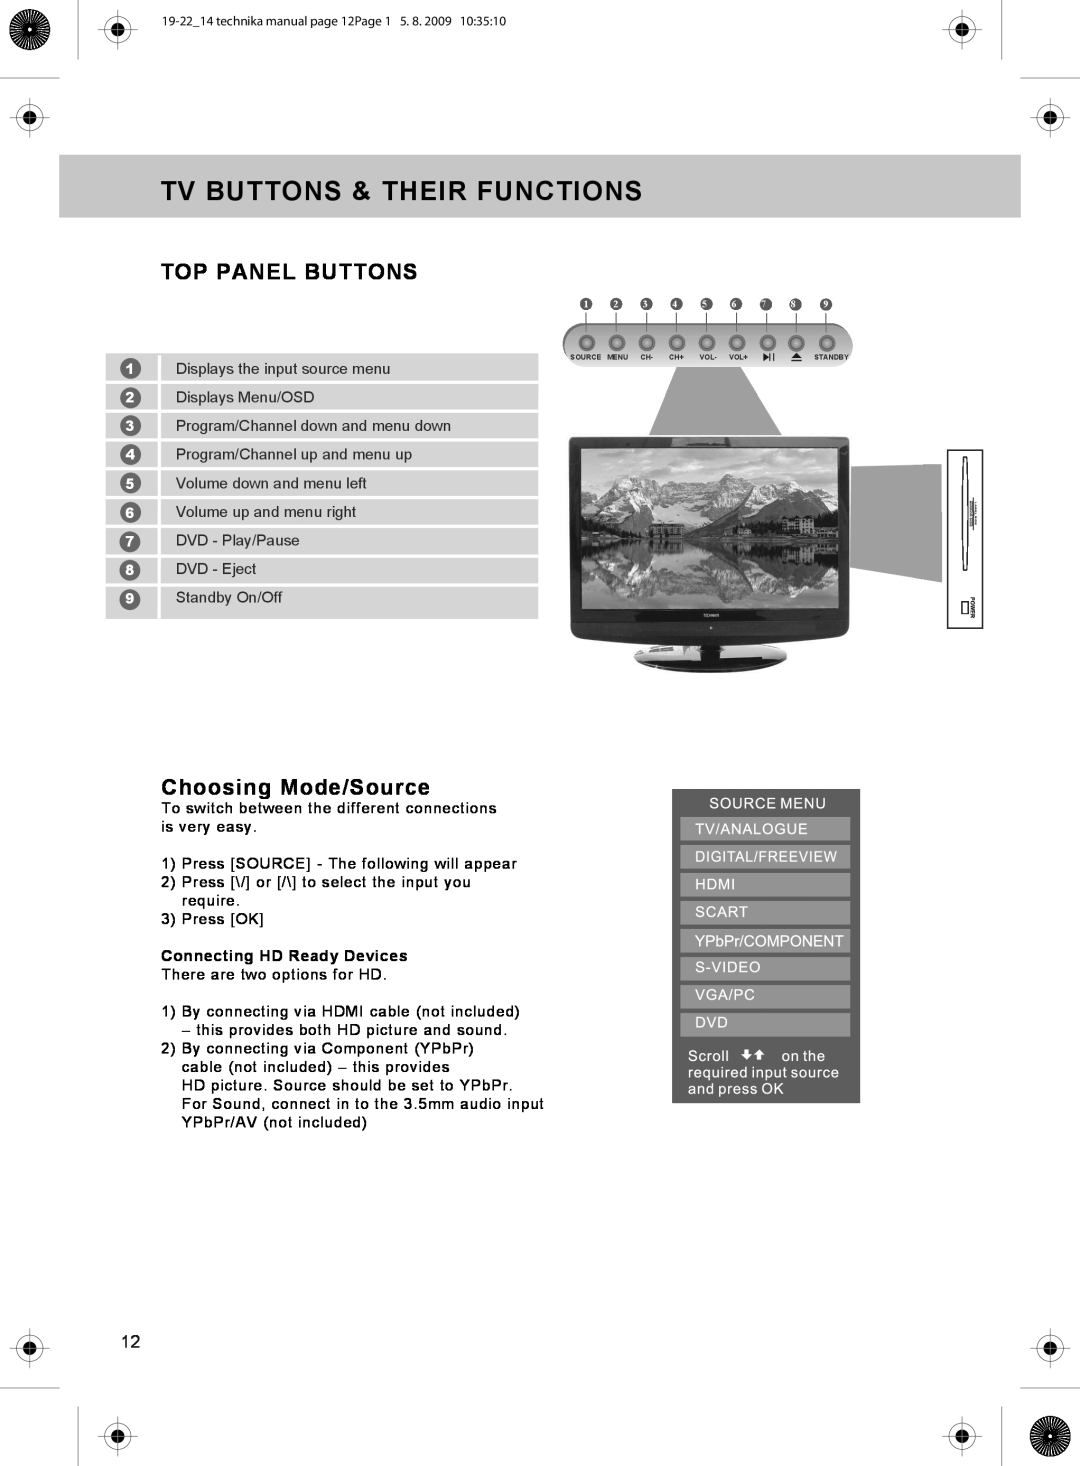 Technika 22-208W Tv Buttons & Their Functions, Top Panel Buttons, Choosing Mode/Source, Displays the input source menu 